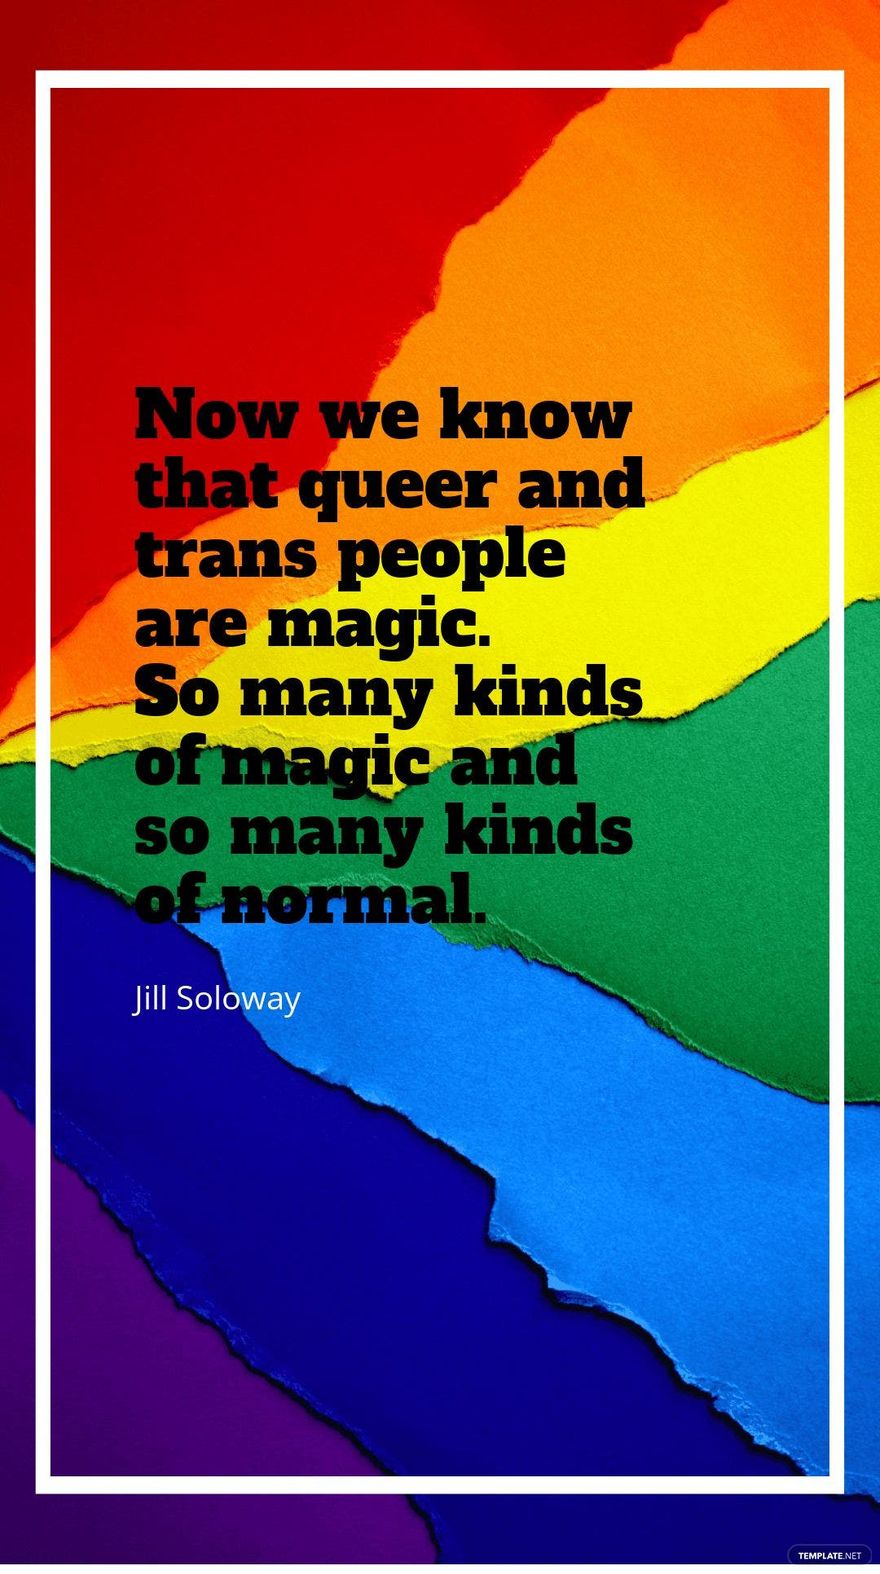 Jill Soloway - Now we know that queer and trans people are magic. So many kinds of magic and so many kinds of normal.